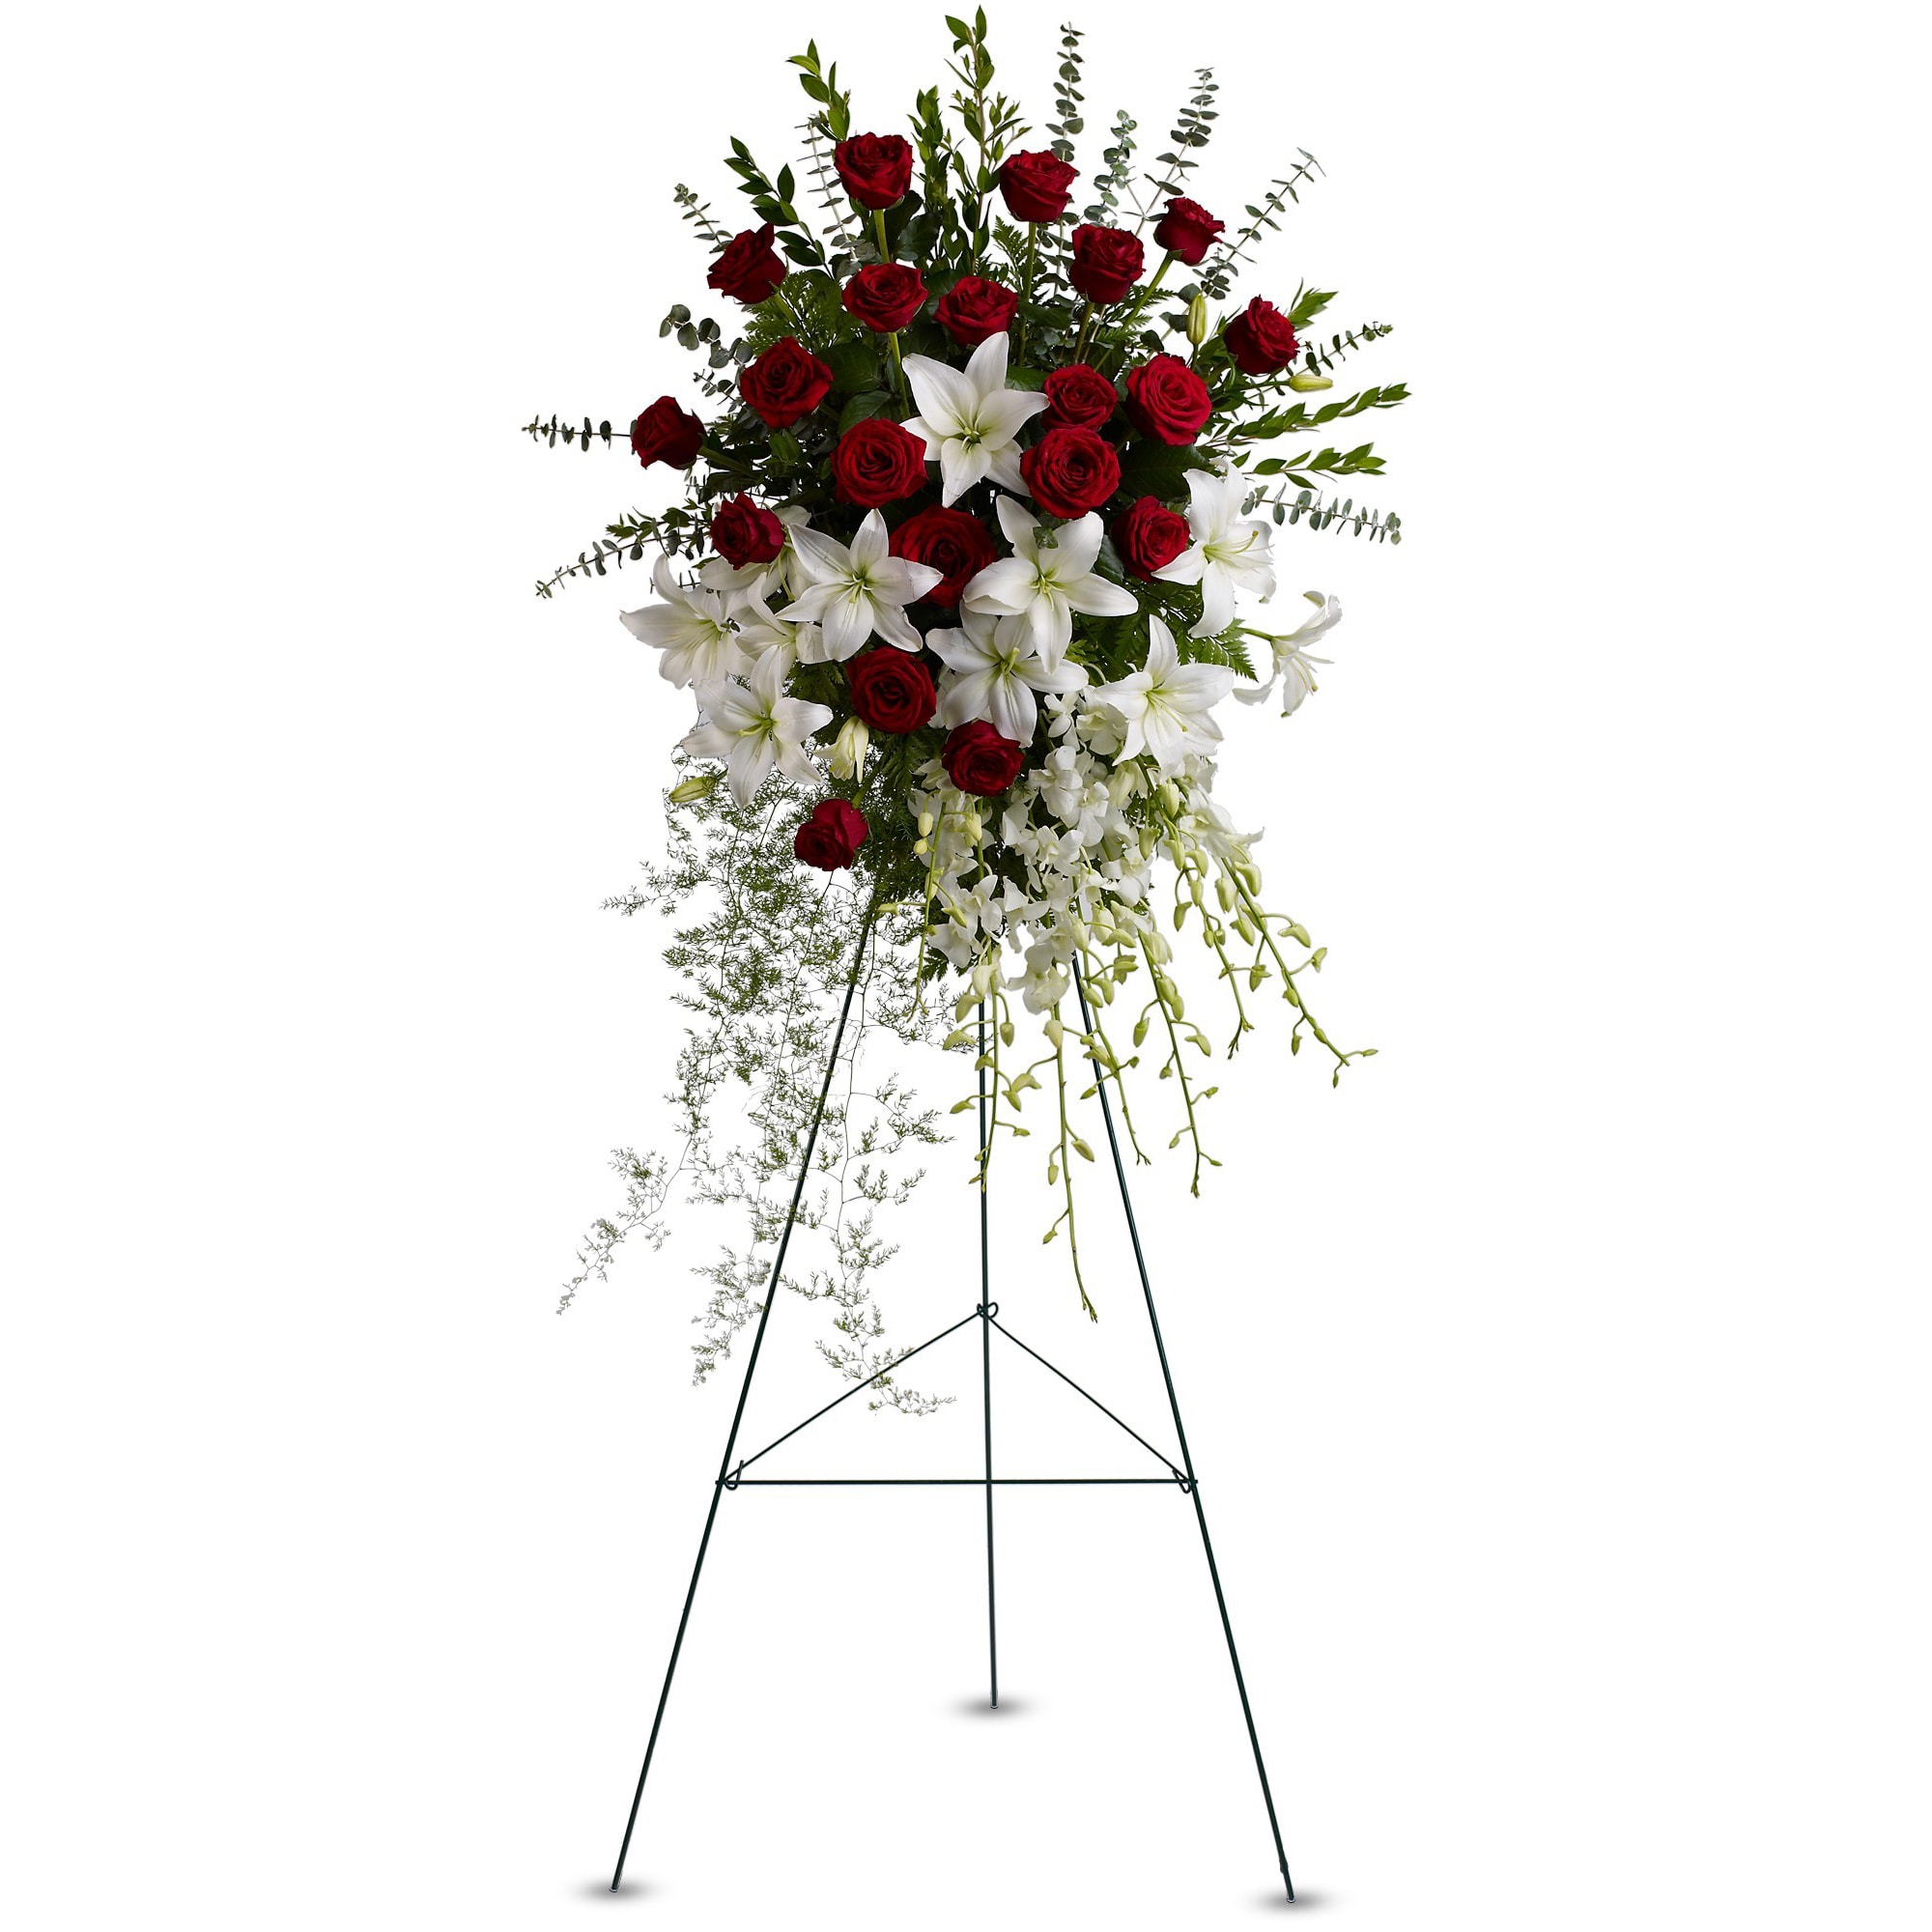 Lily and Rose Tribute Spray by Teleflora - Shown as Standard Pure white lilies and dendrobium orchids mingle with red roses, white asiatic lilies and more in this magnificent and impressive standing spray of the finest blooms. A fitting tribute for a funeral, wake or memorial service. Appropriate for the service *We custom design this arrangement and use the freshest flowers available the day of delivery. The arrangement in this picture is an example of the size and style and may not feature the exact product shown.* 